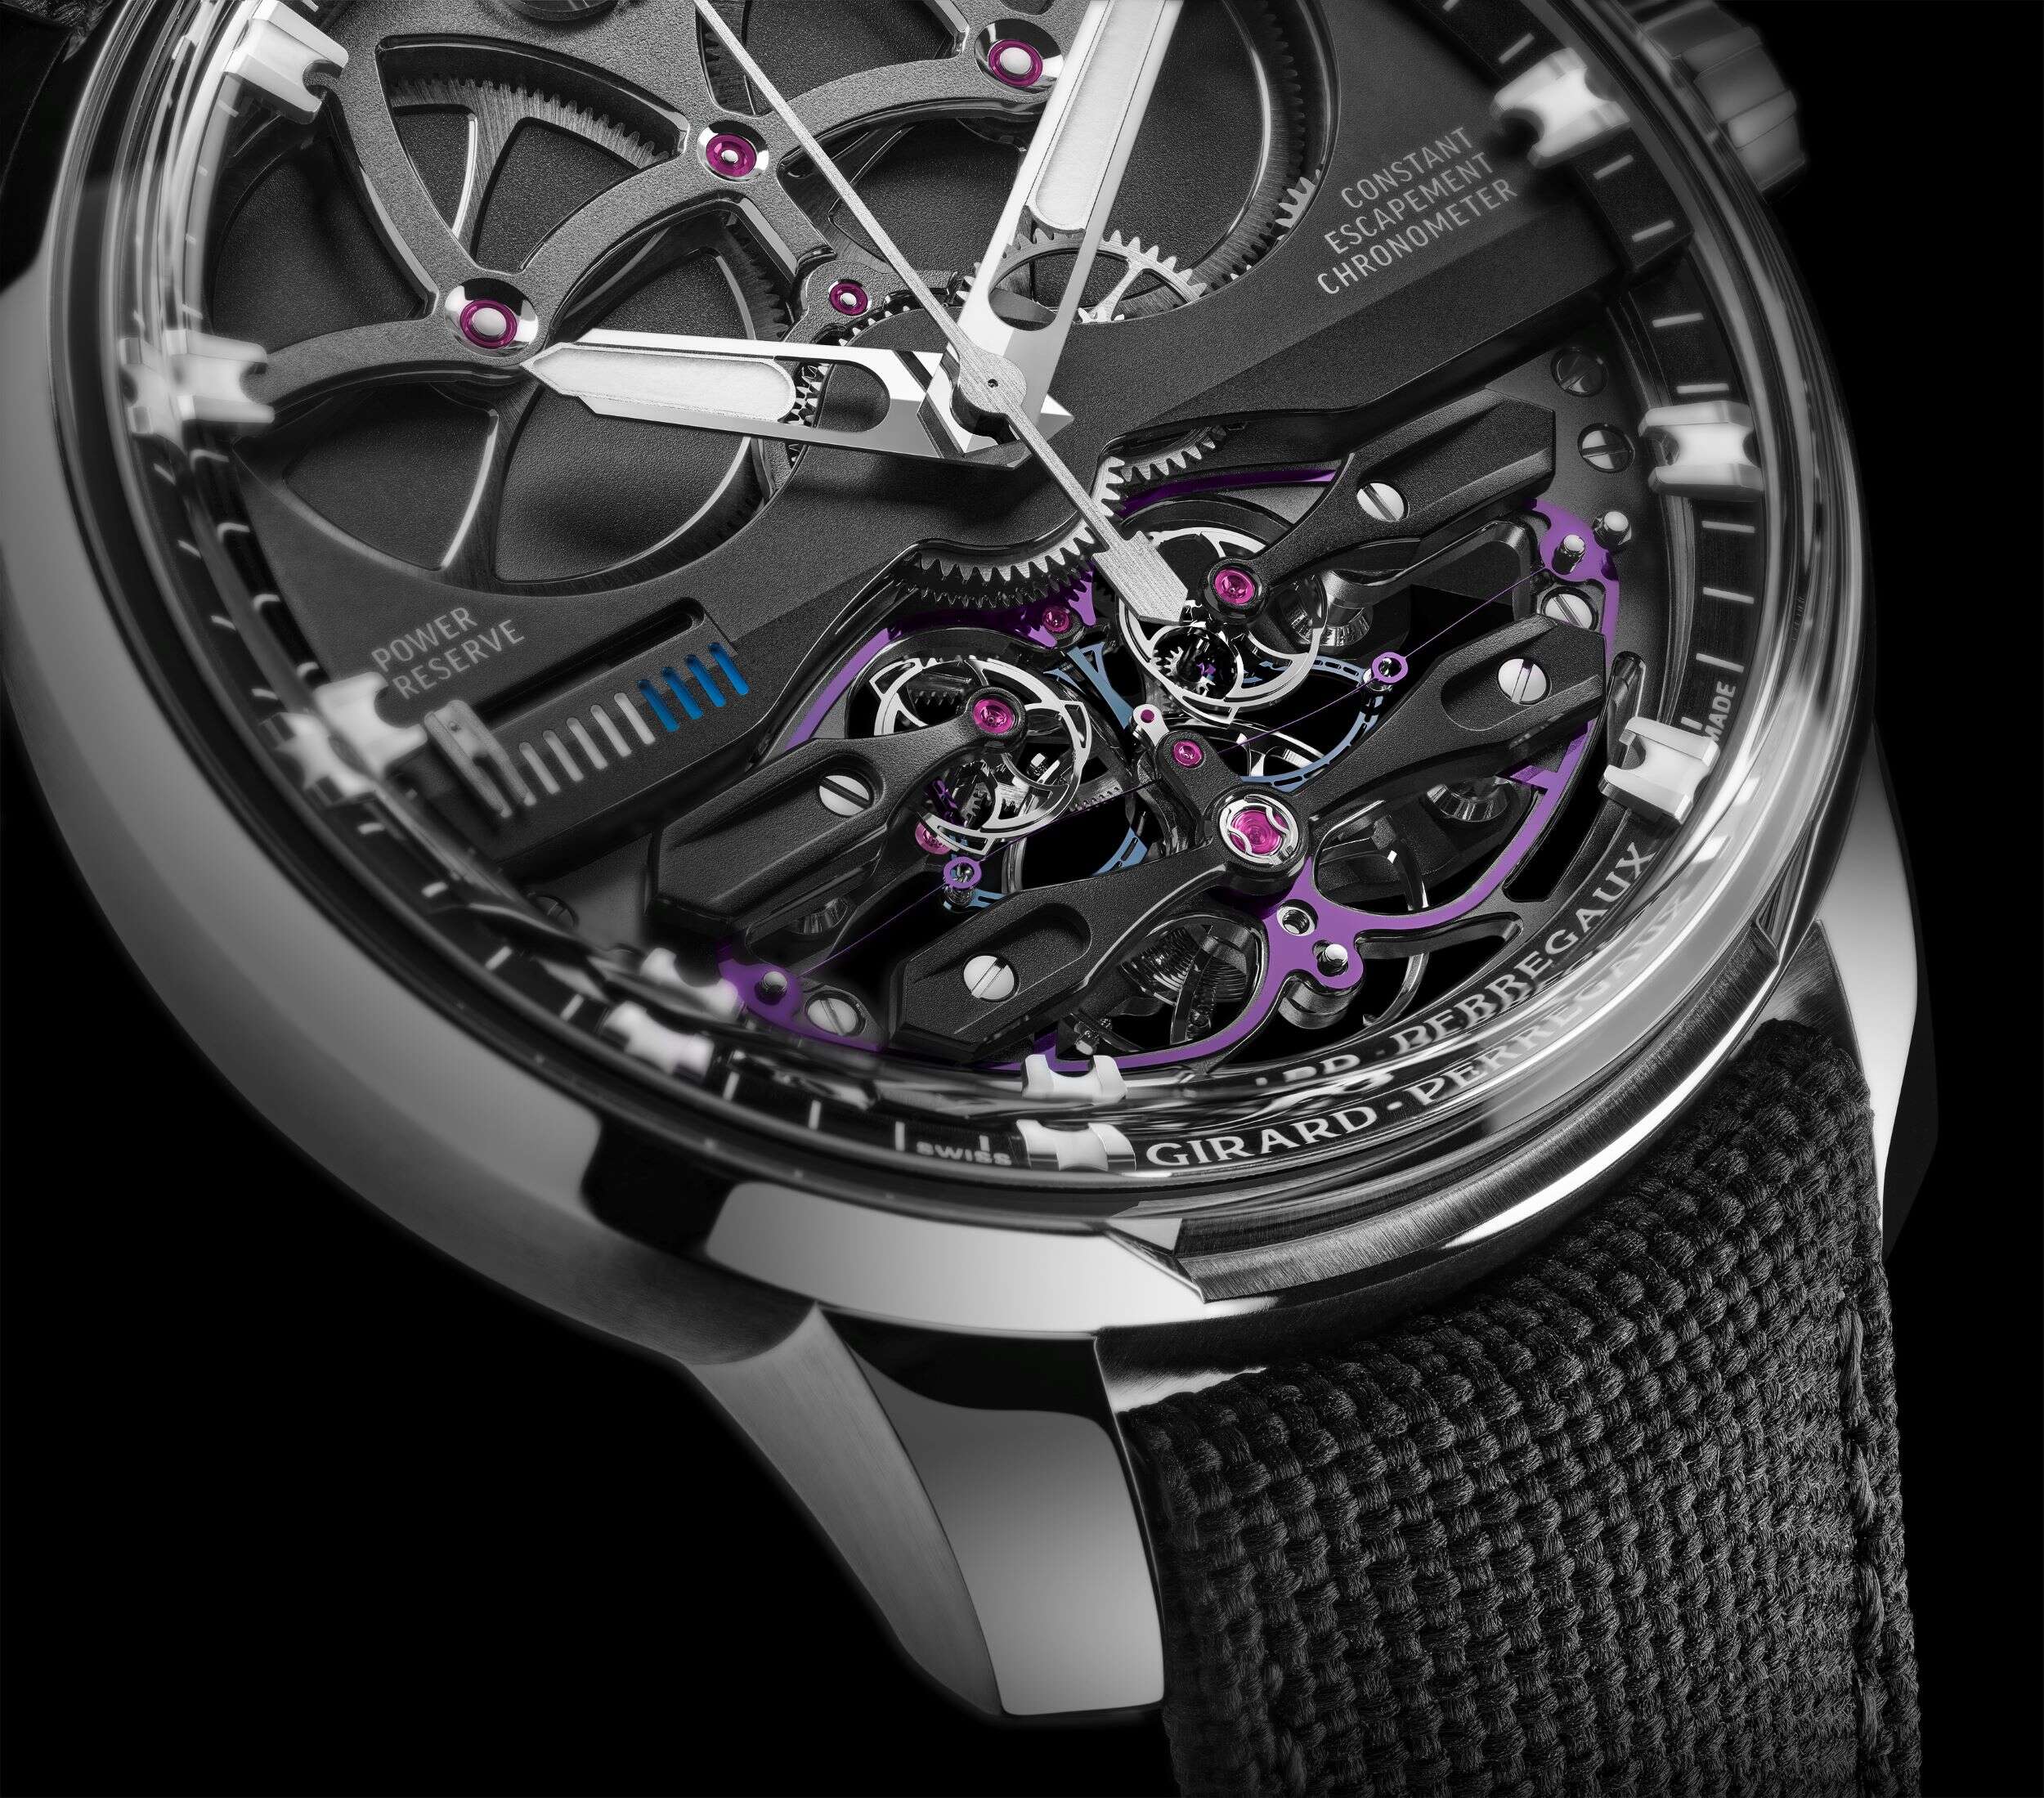 Girard-Perregaux Launches the Neo Constant Escapement Watch